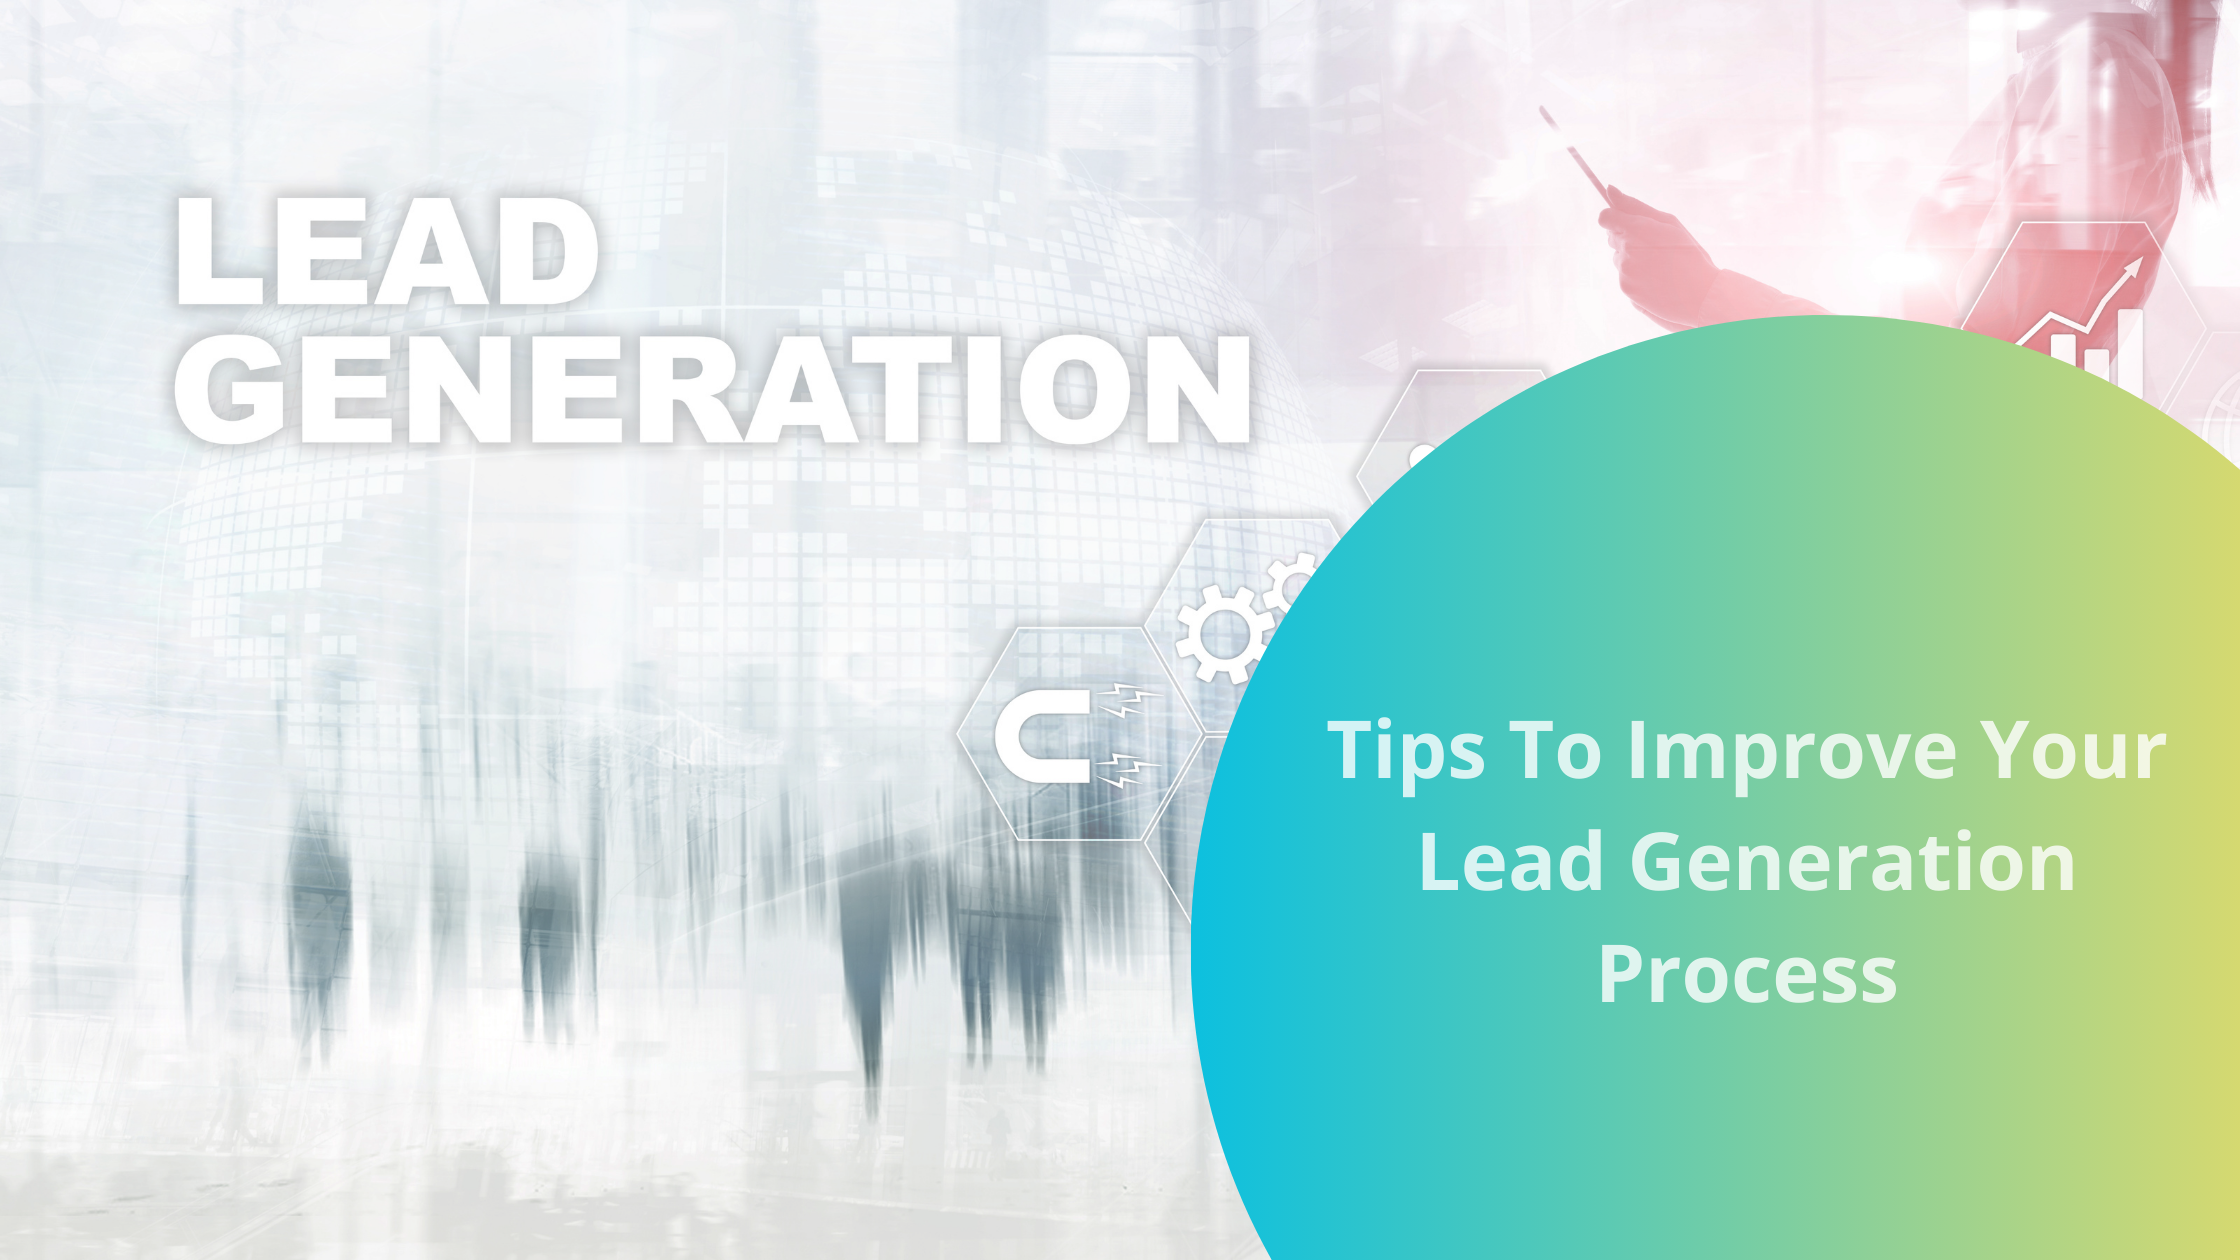 10 tips to improve your lead generation process | bookafy